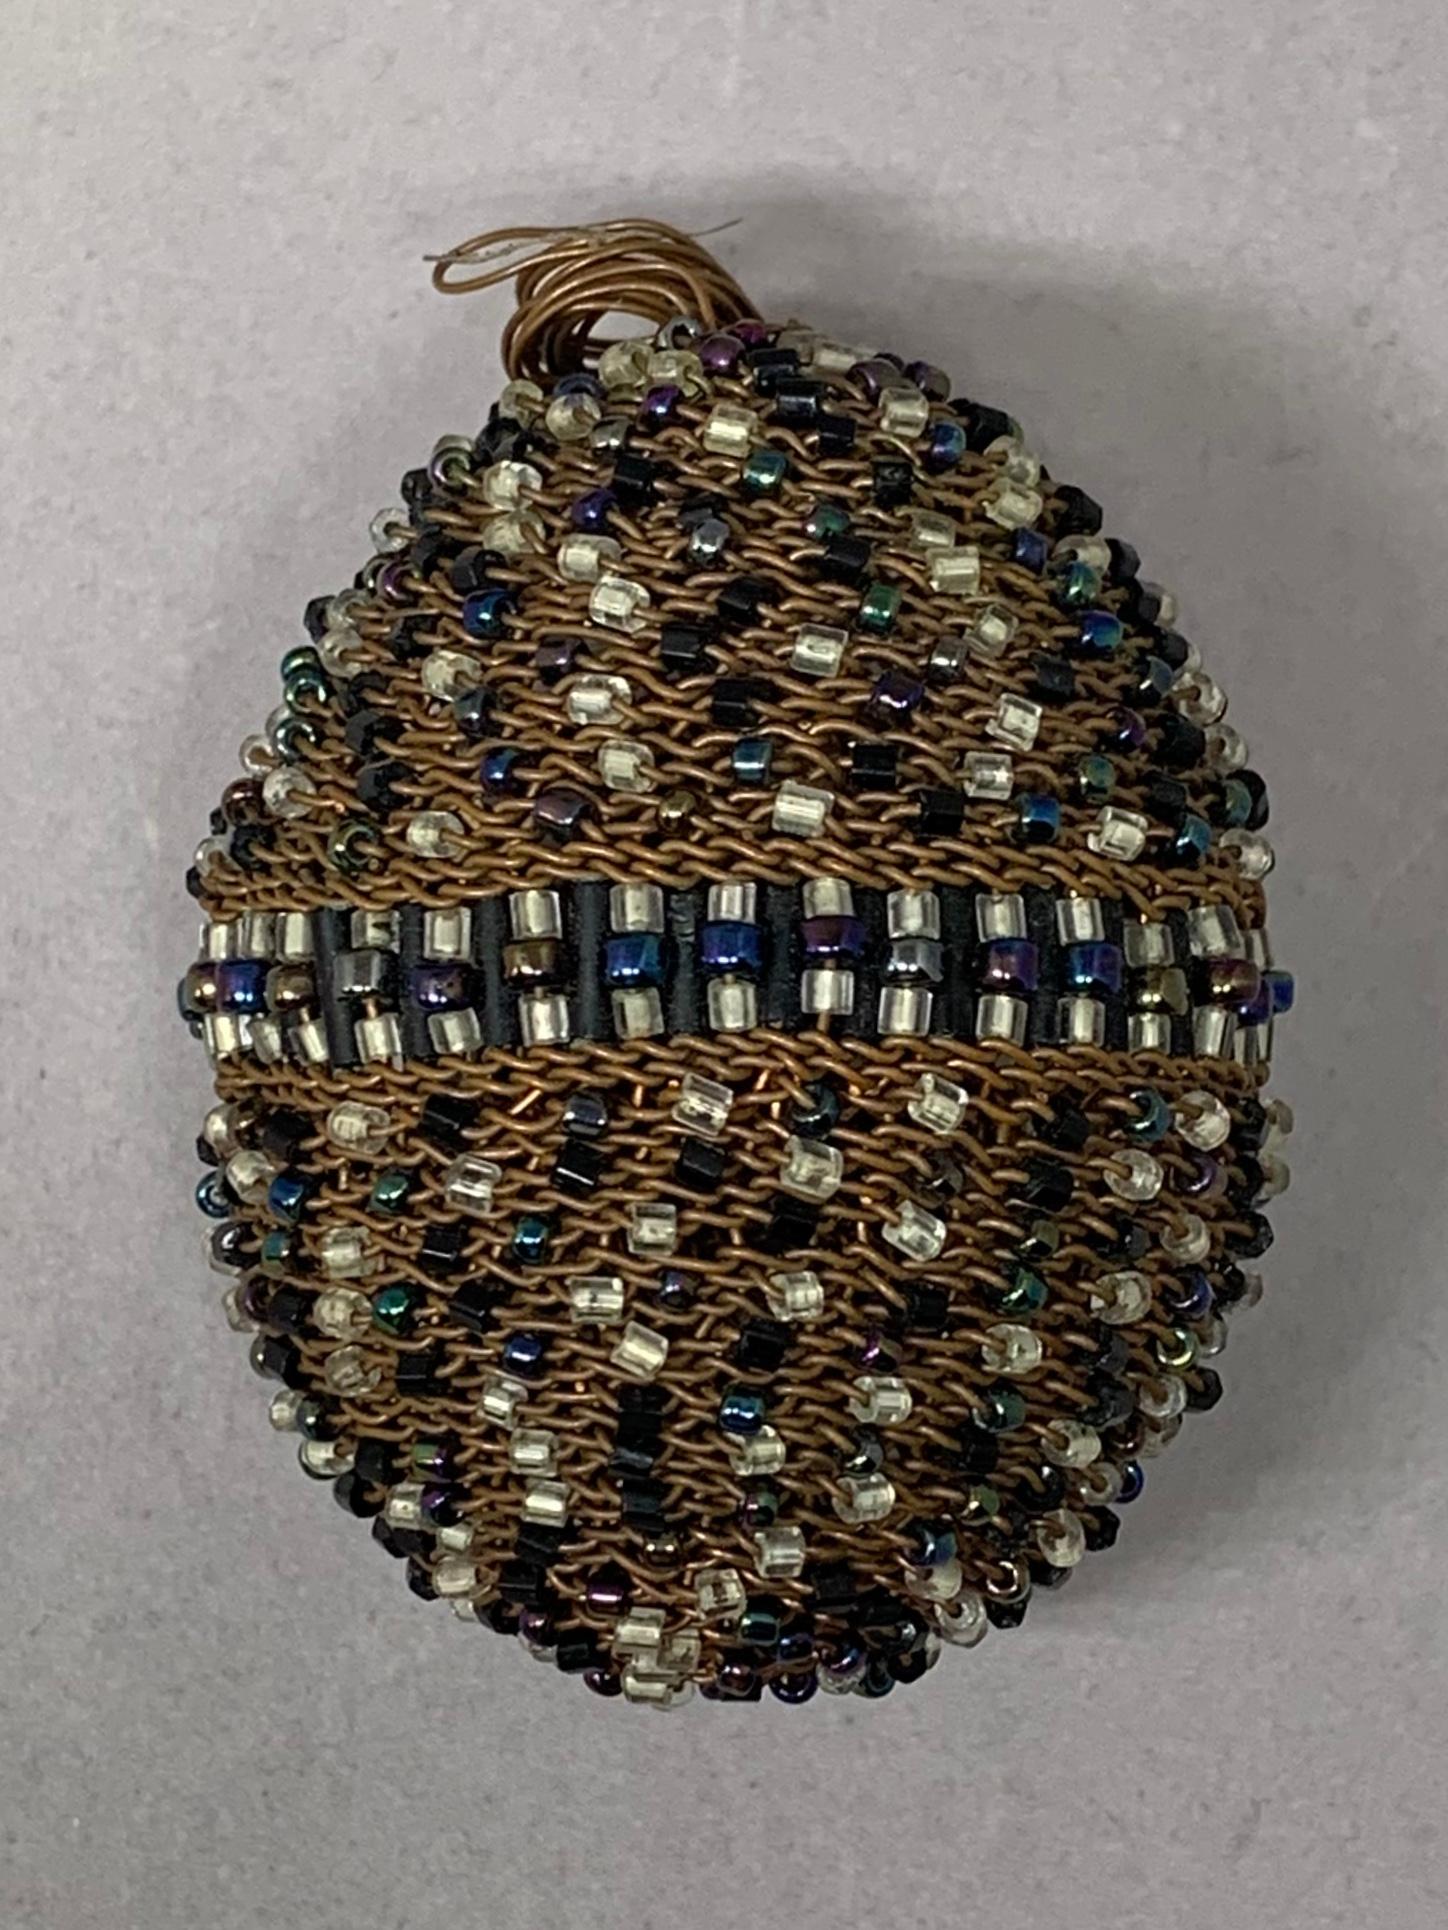 Copper beaded egg with nest. Handmade Easter/Spring egg of copper wire and iridescent and clear beading with small bird’s nest; possibly Northern Parula. United States, contemporary.
Dimensions: nest 4.5